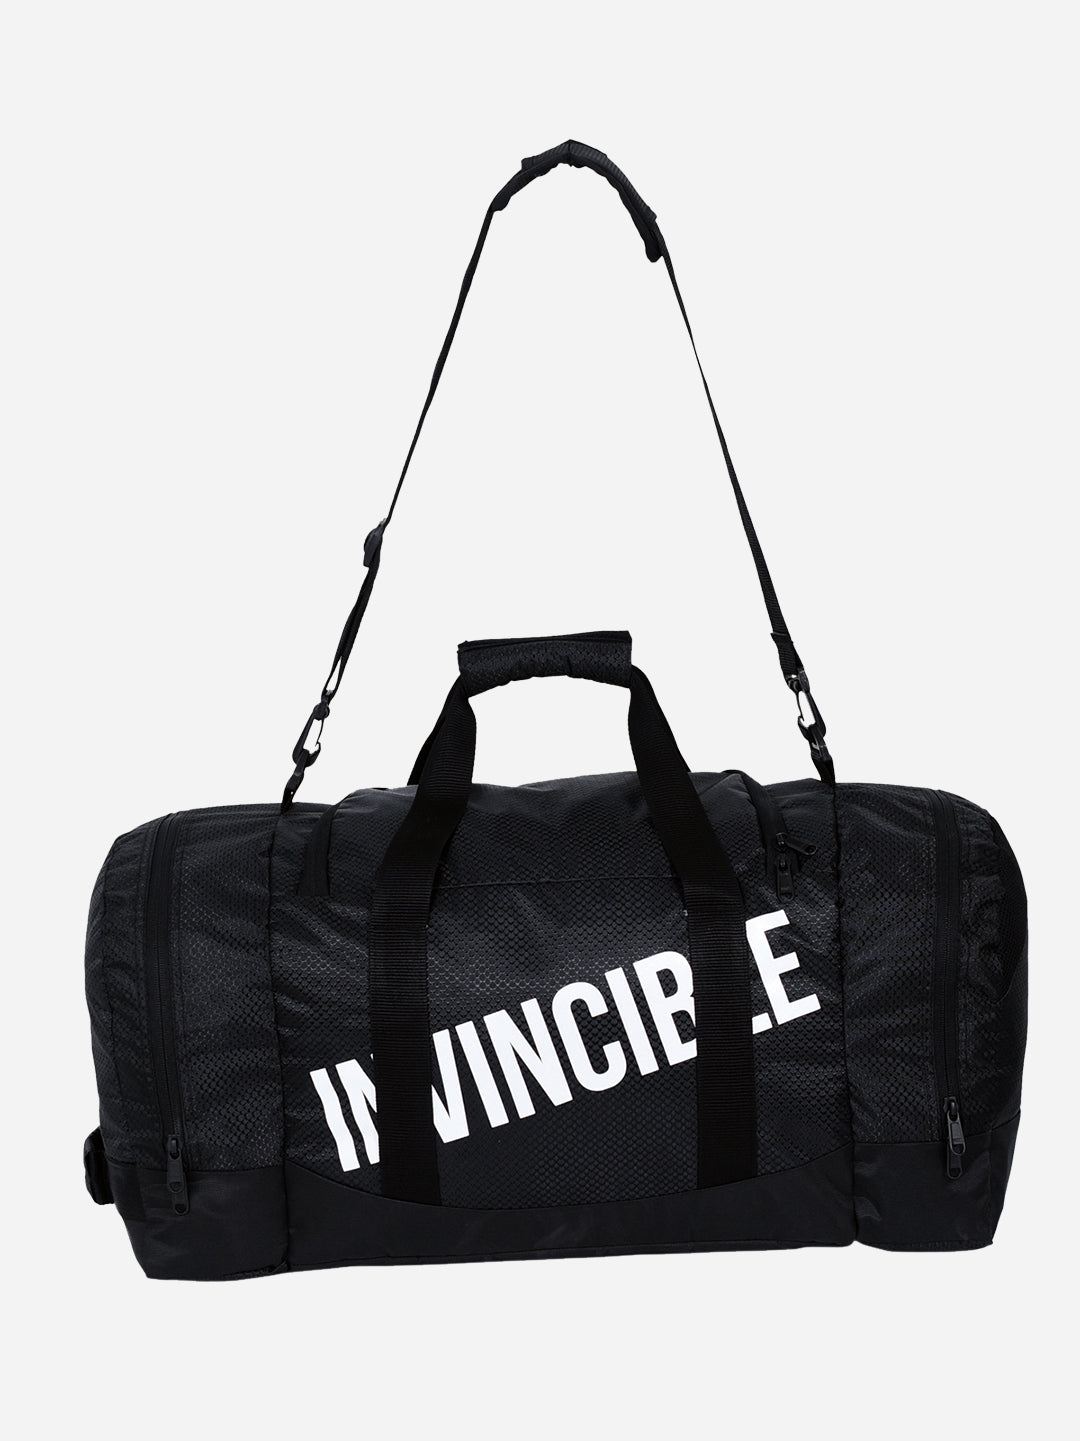 Invincible Team Sports Bag Polyester Dual Color 54 Ltrs